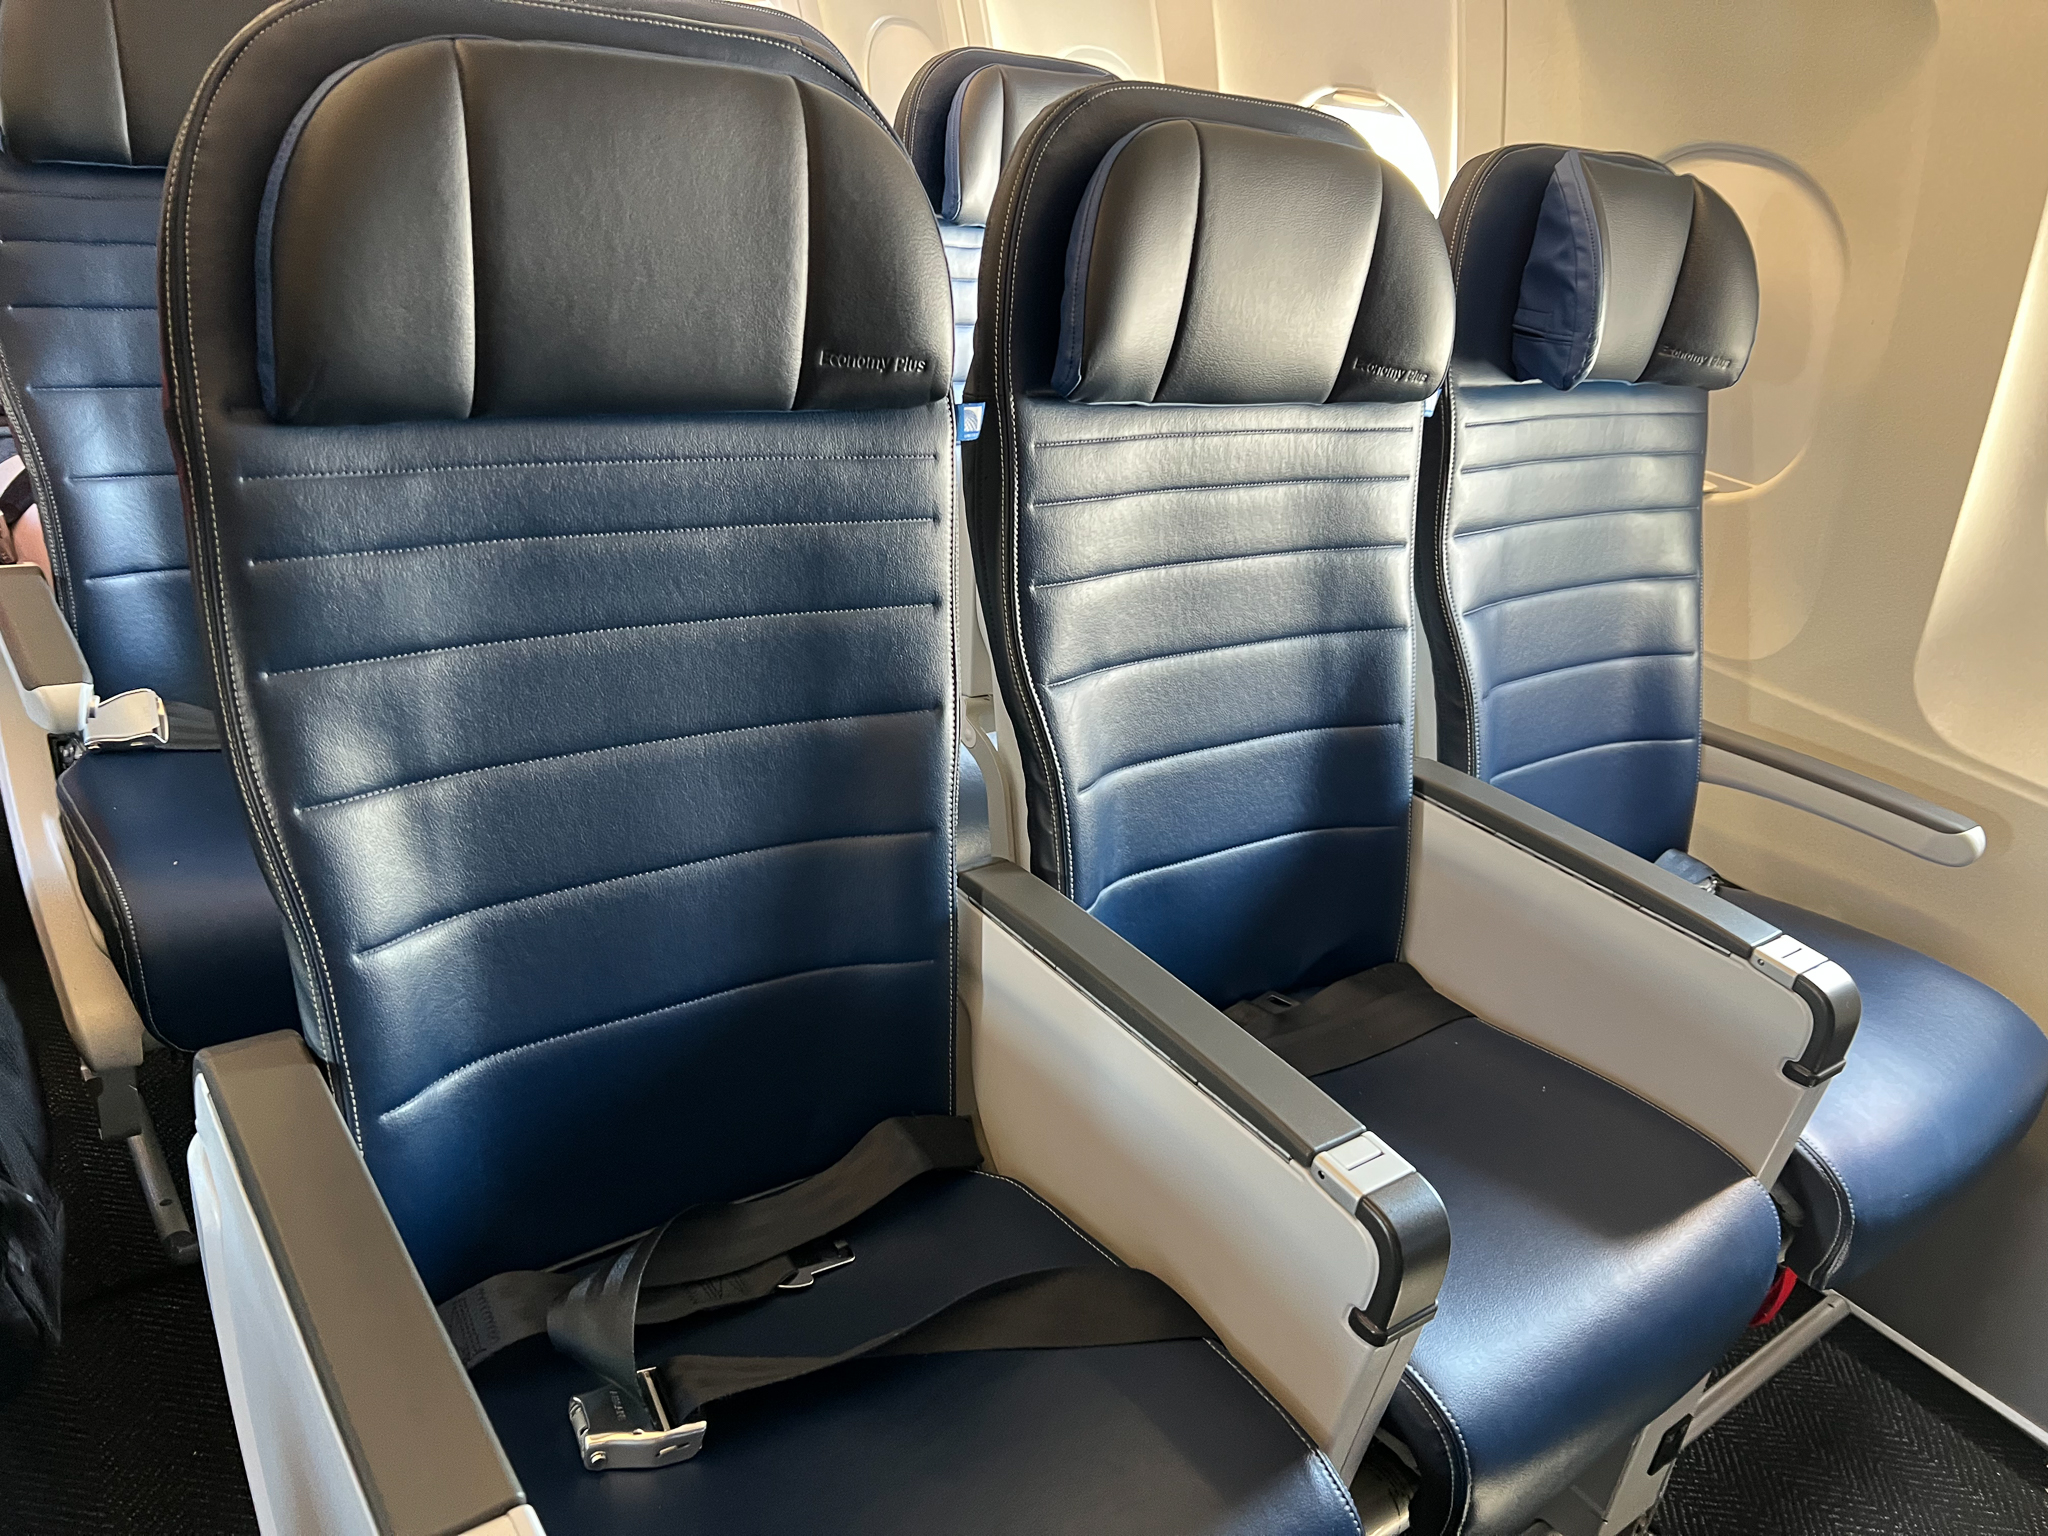 Booked basic economy on US to Canada flight. Fare class assigned as T. Will  I be allowed both a personal item and full size carry on? : r/unitedairlines